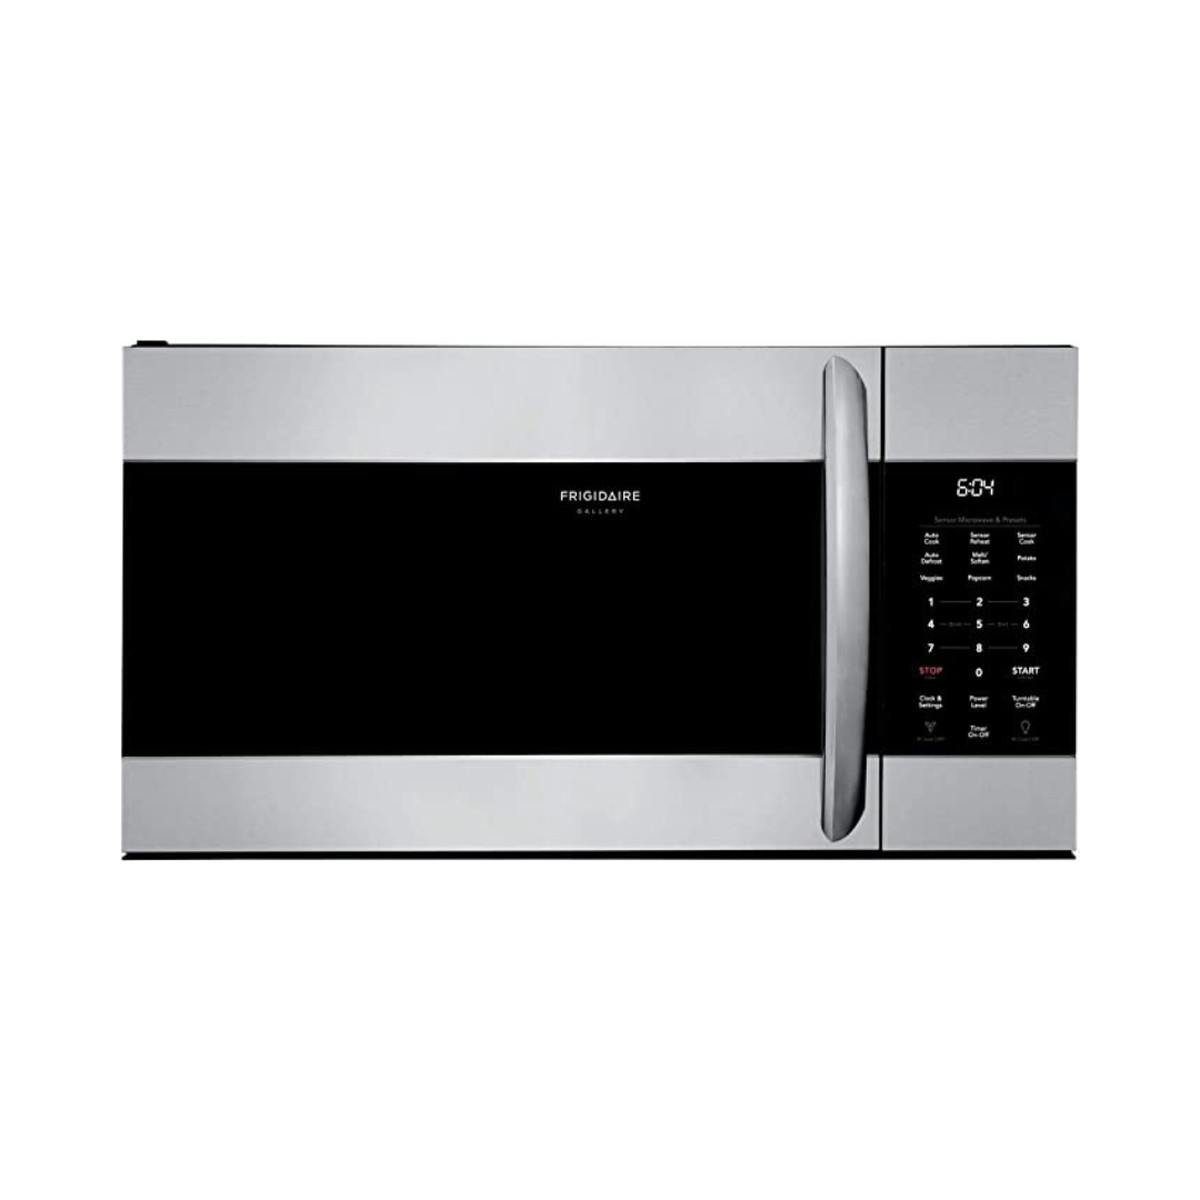 FRIGIDAIRE SmudgeProof Over-the-Range Microwave